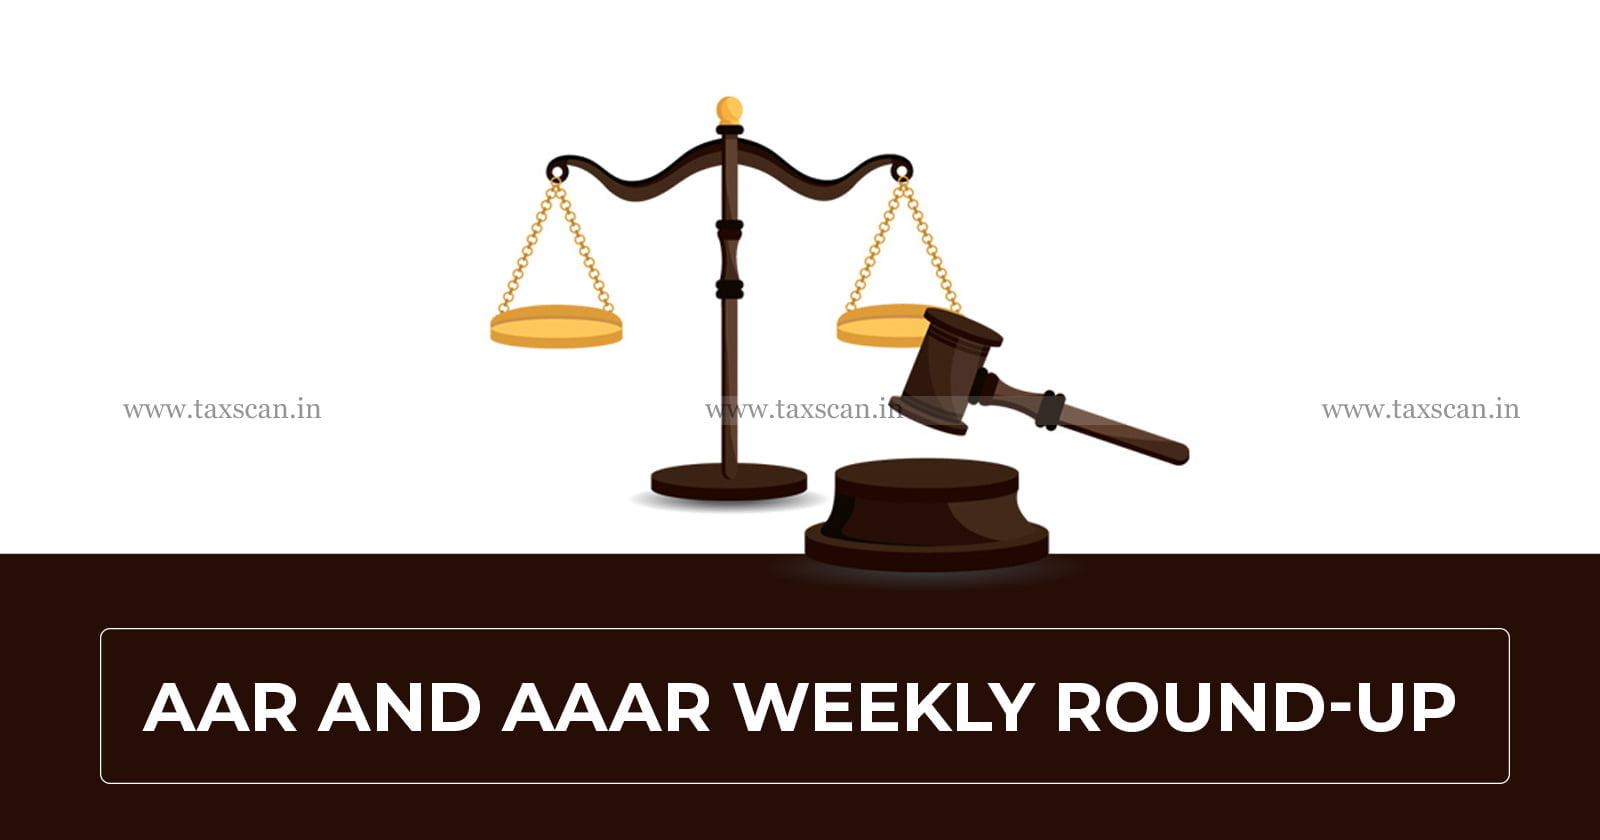 Authority for Advance Ruling - AAR - AAAR - Weekly Round-UP - taxscan